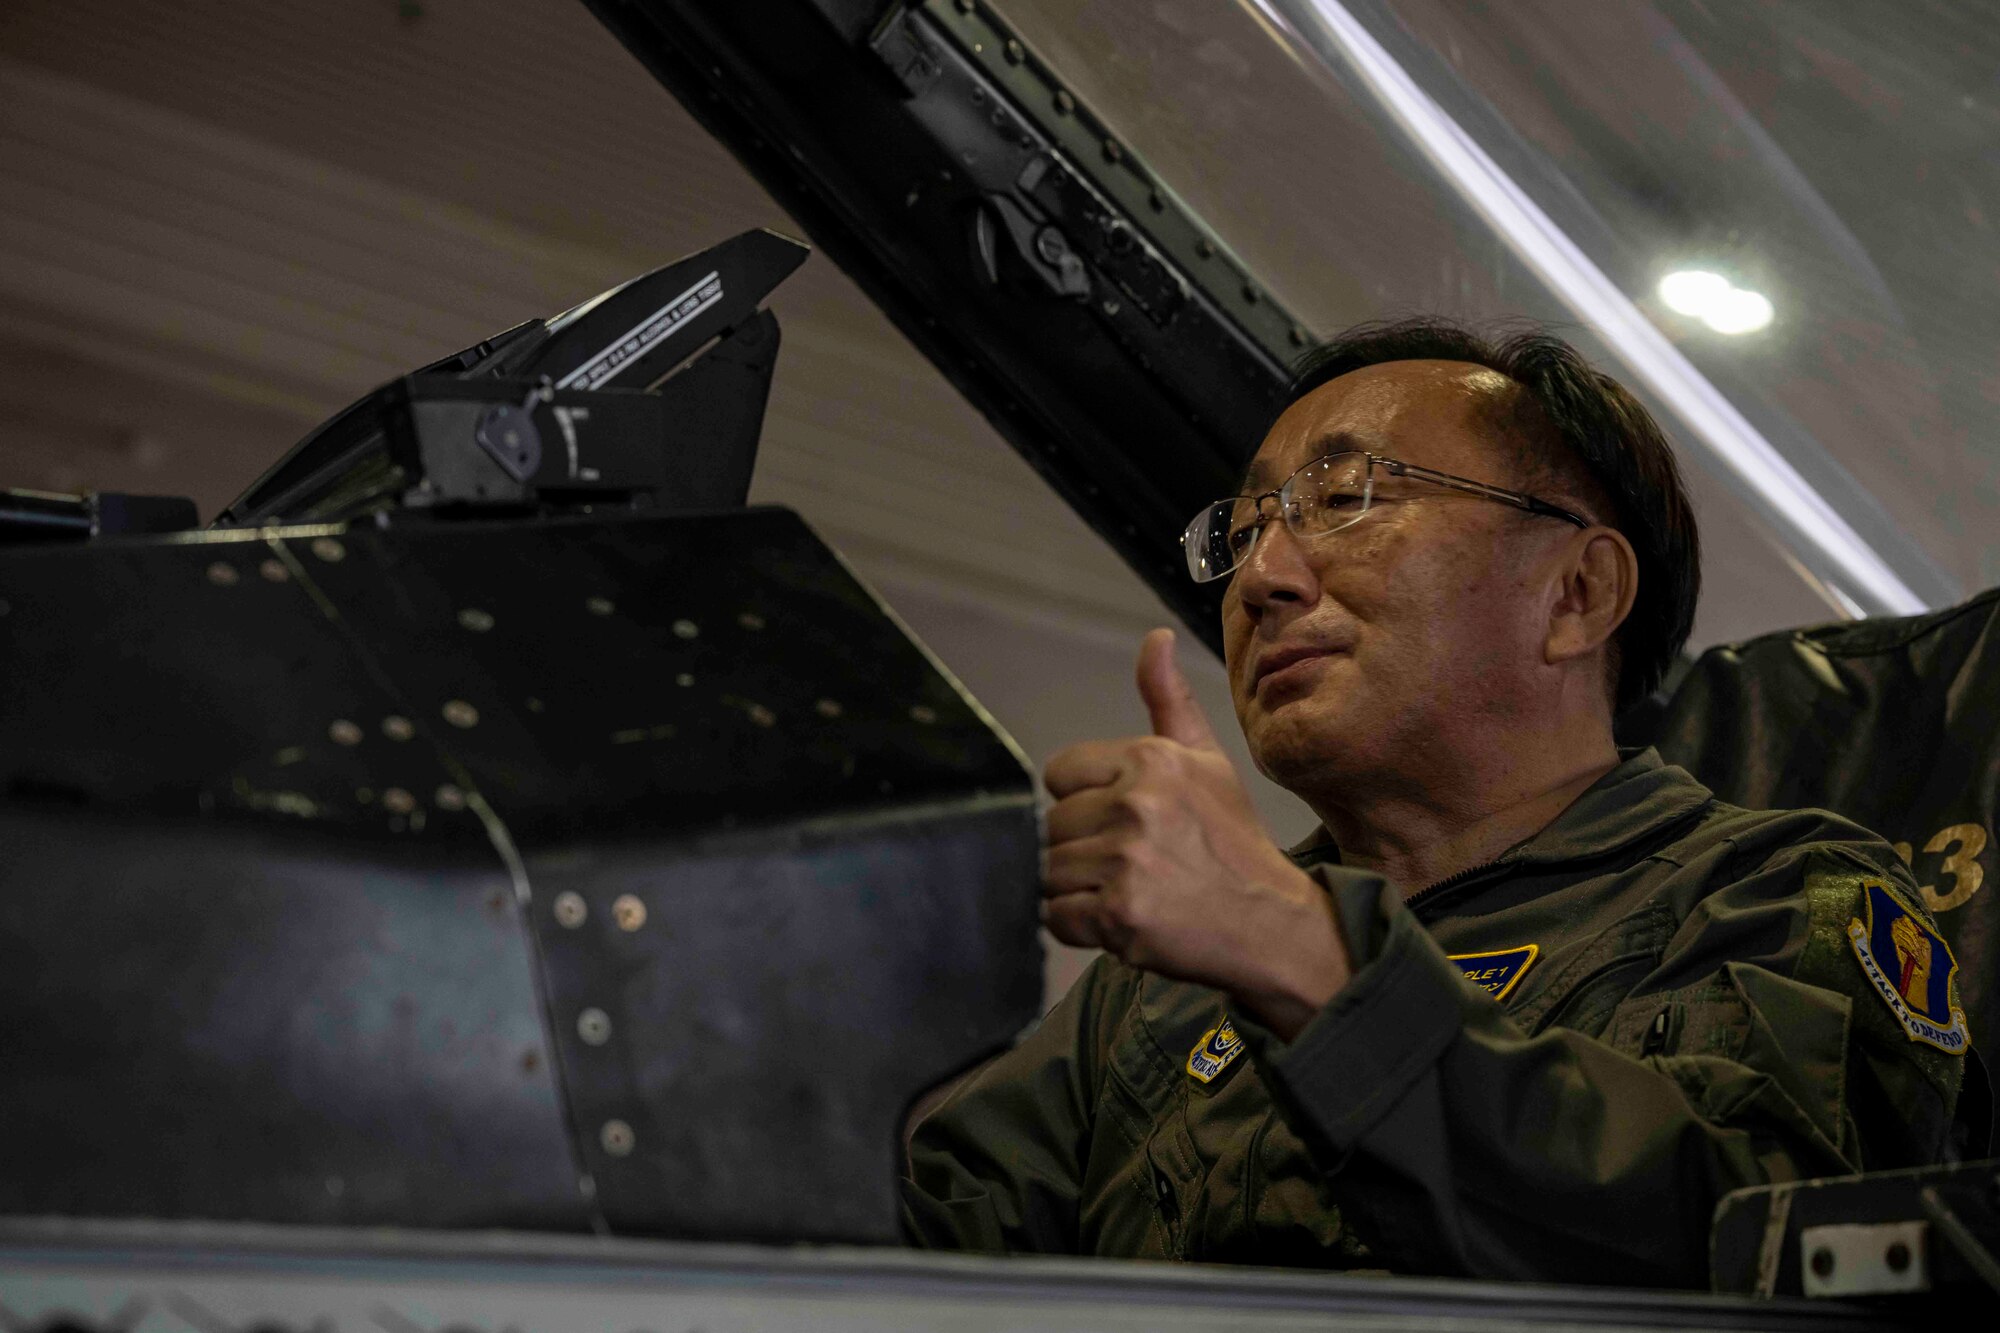 A man gives a thumbs up as he sits inside the cockpit of a fighter jet in a hangar at Misawa Air Base.